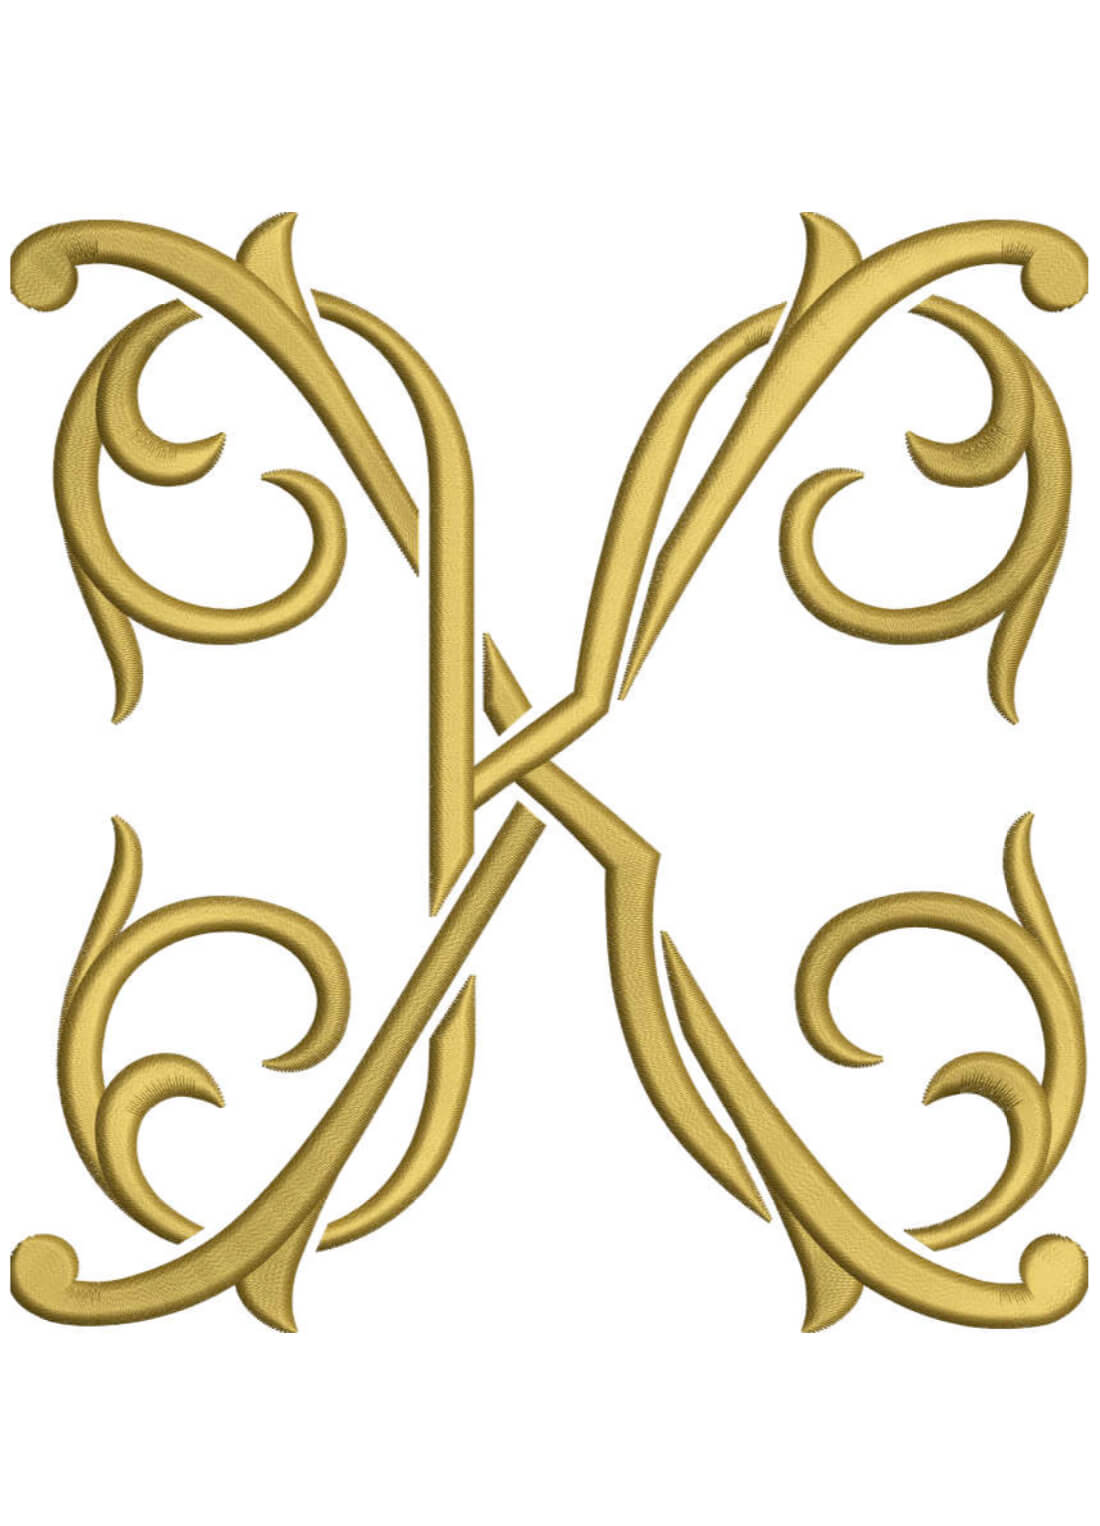 Monogram Couture KX for Embroidery